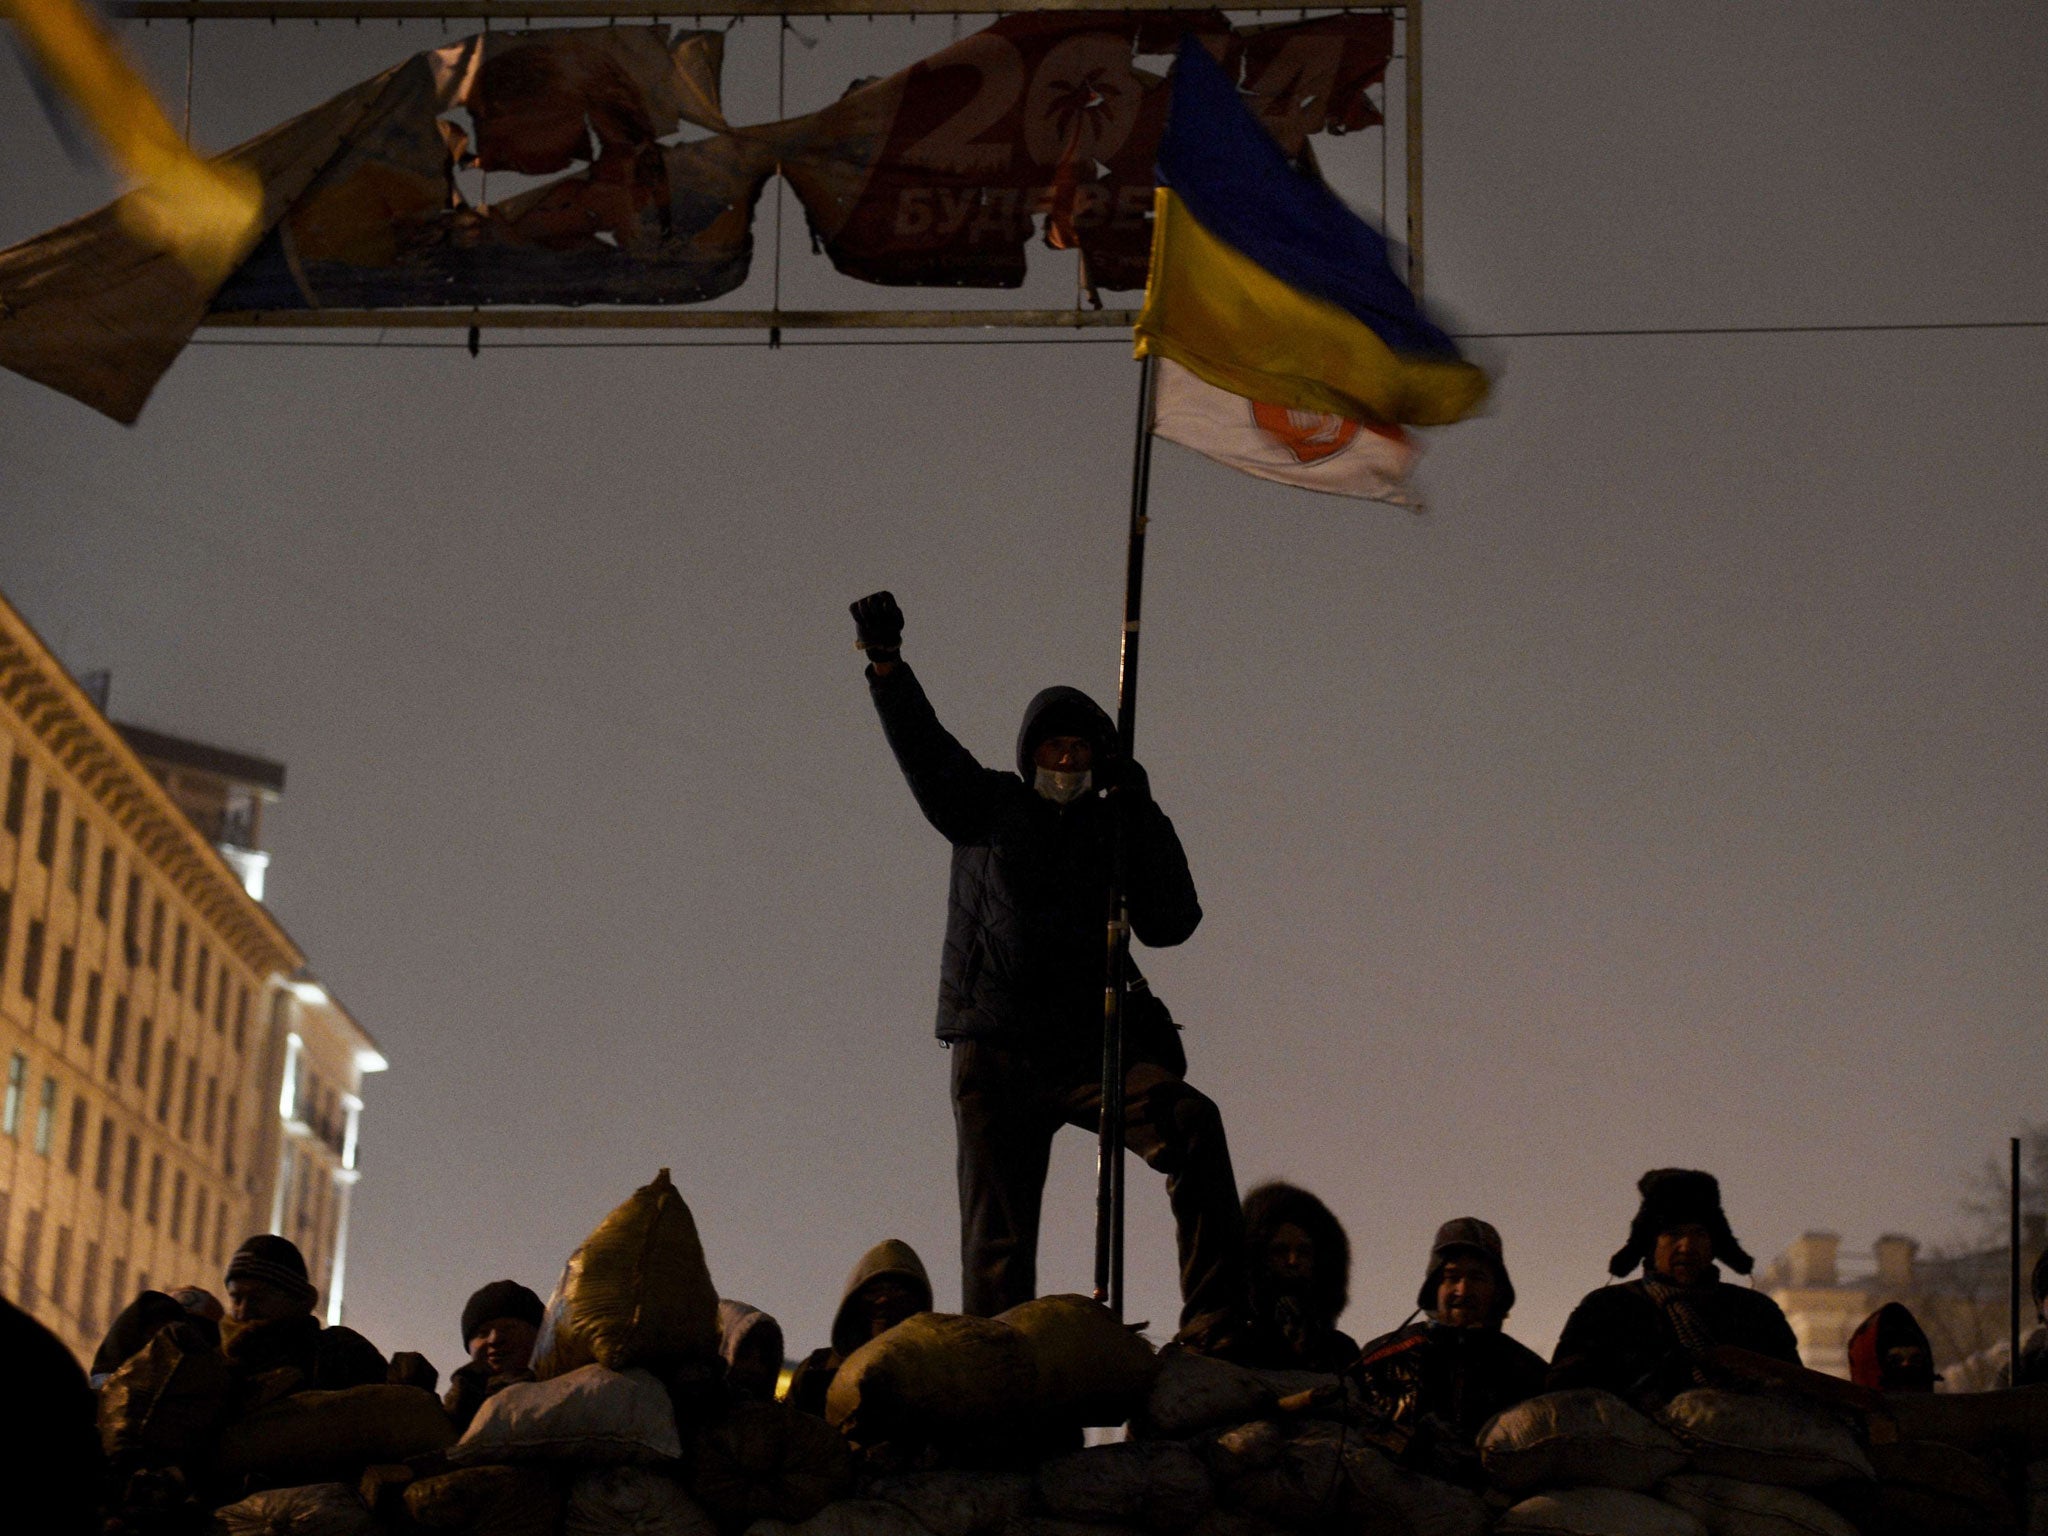 A demonstrator raises his fist as anti-government protesters gather at a road block in Kiev on January 28, 2014